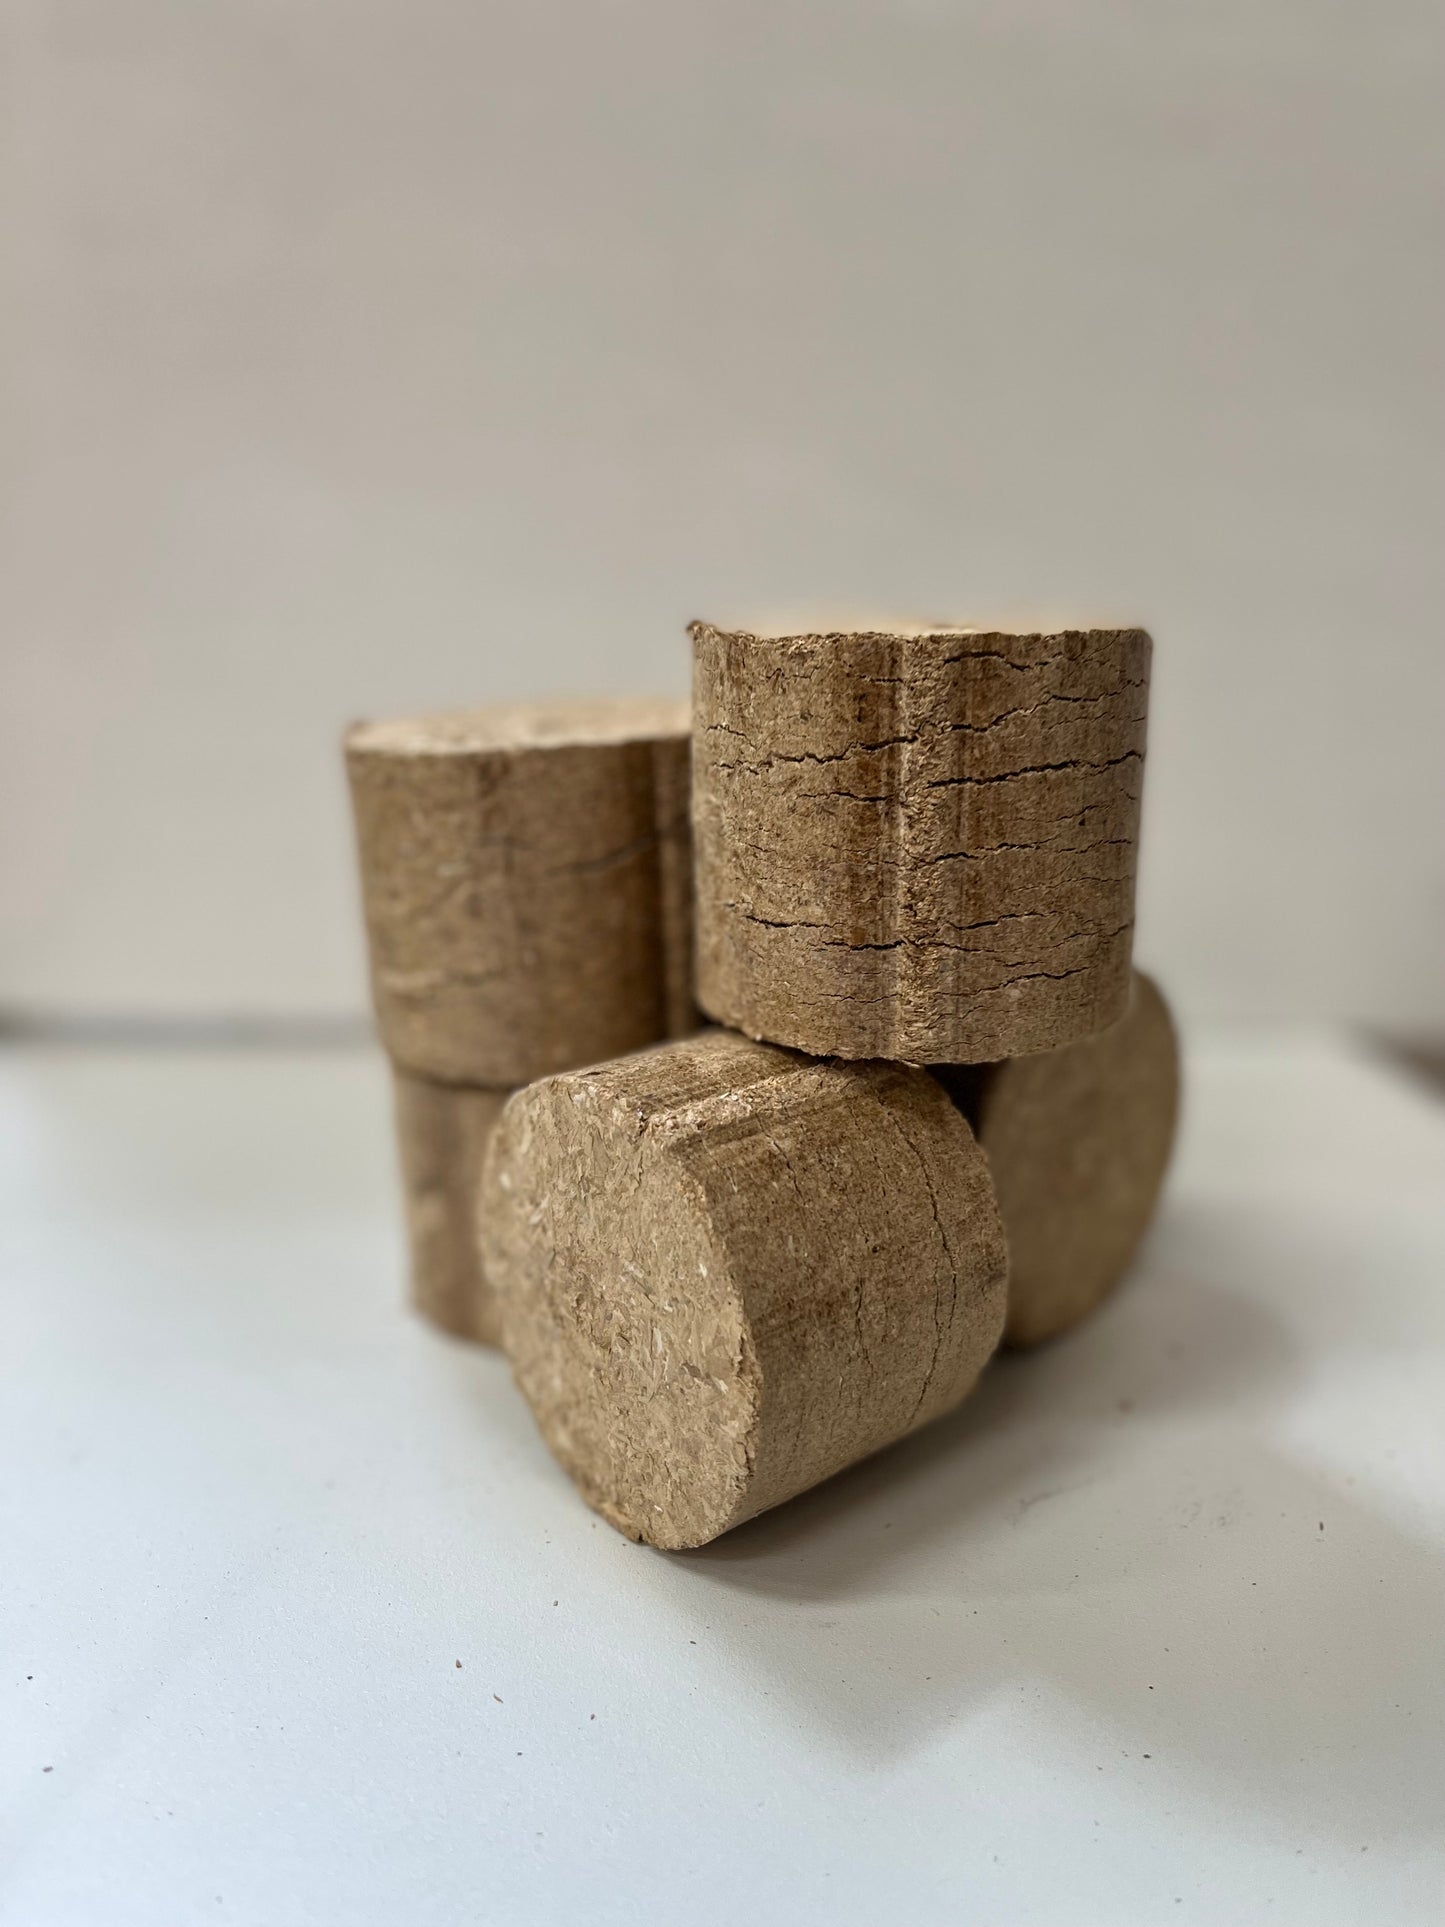 Super-compressed 100% Pure French Oak Briquettes. Specific for Pizzerias, Mobile & fixed wood-fired ovens and open fire pits. Fit for commercial or domestic use.